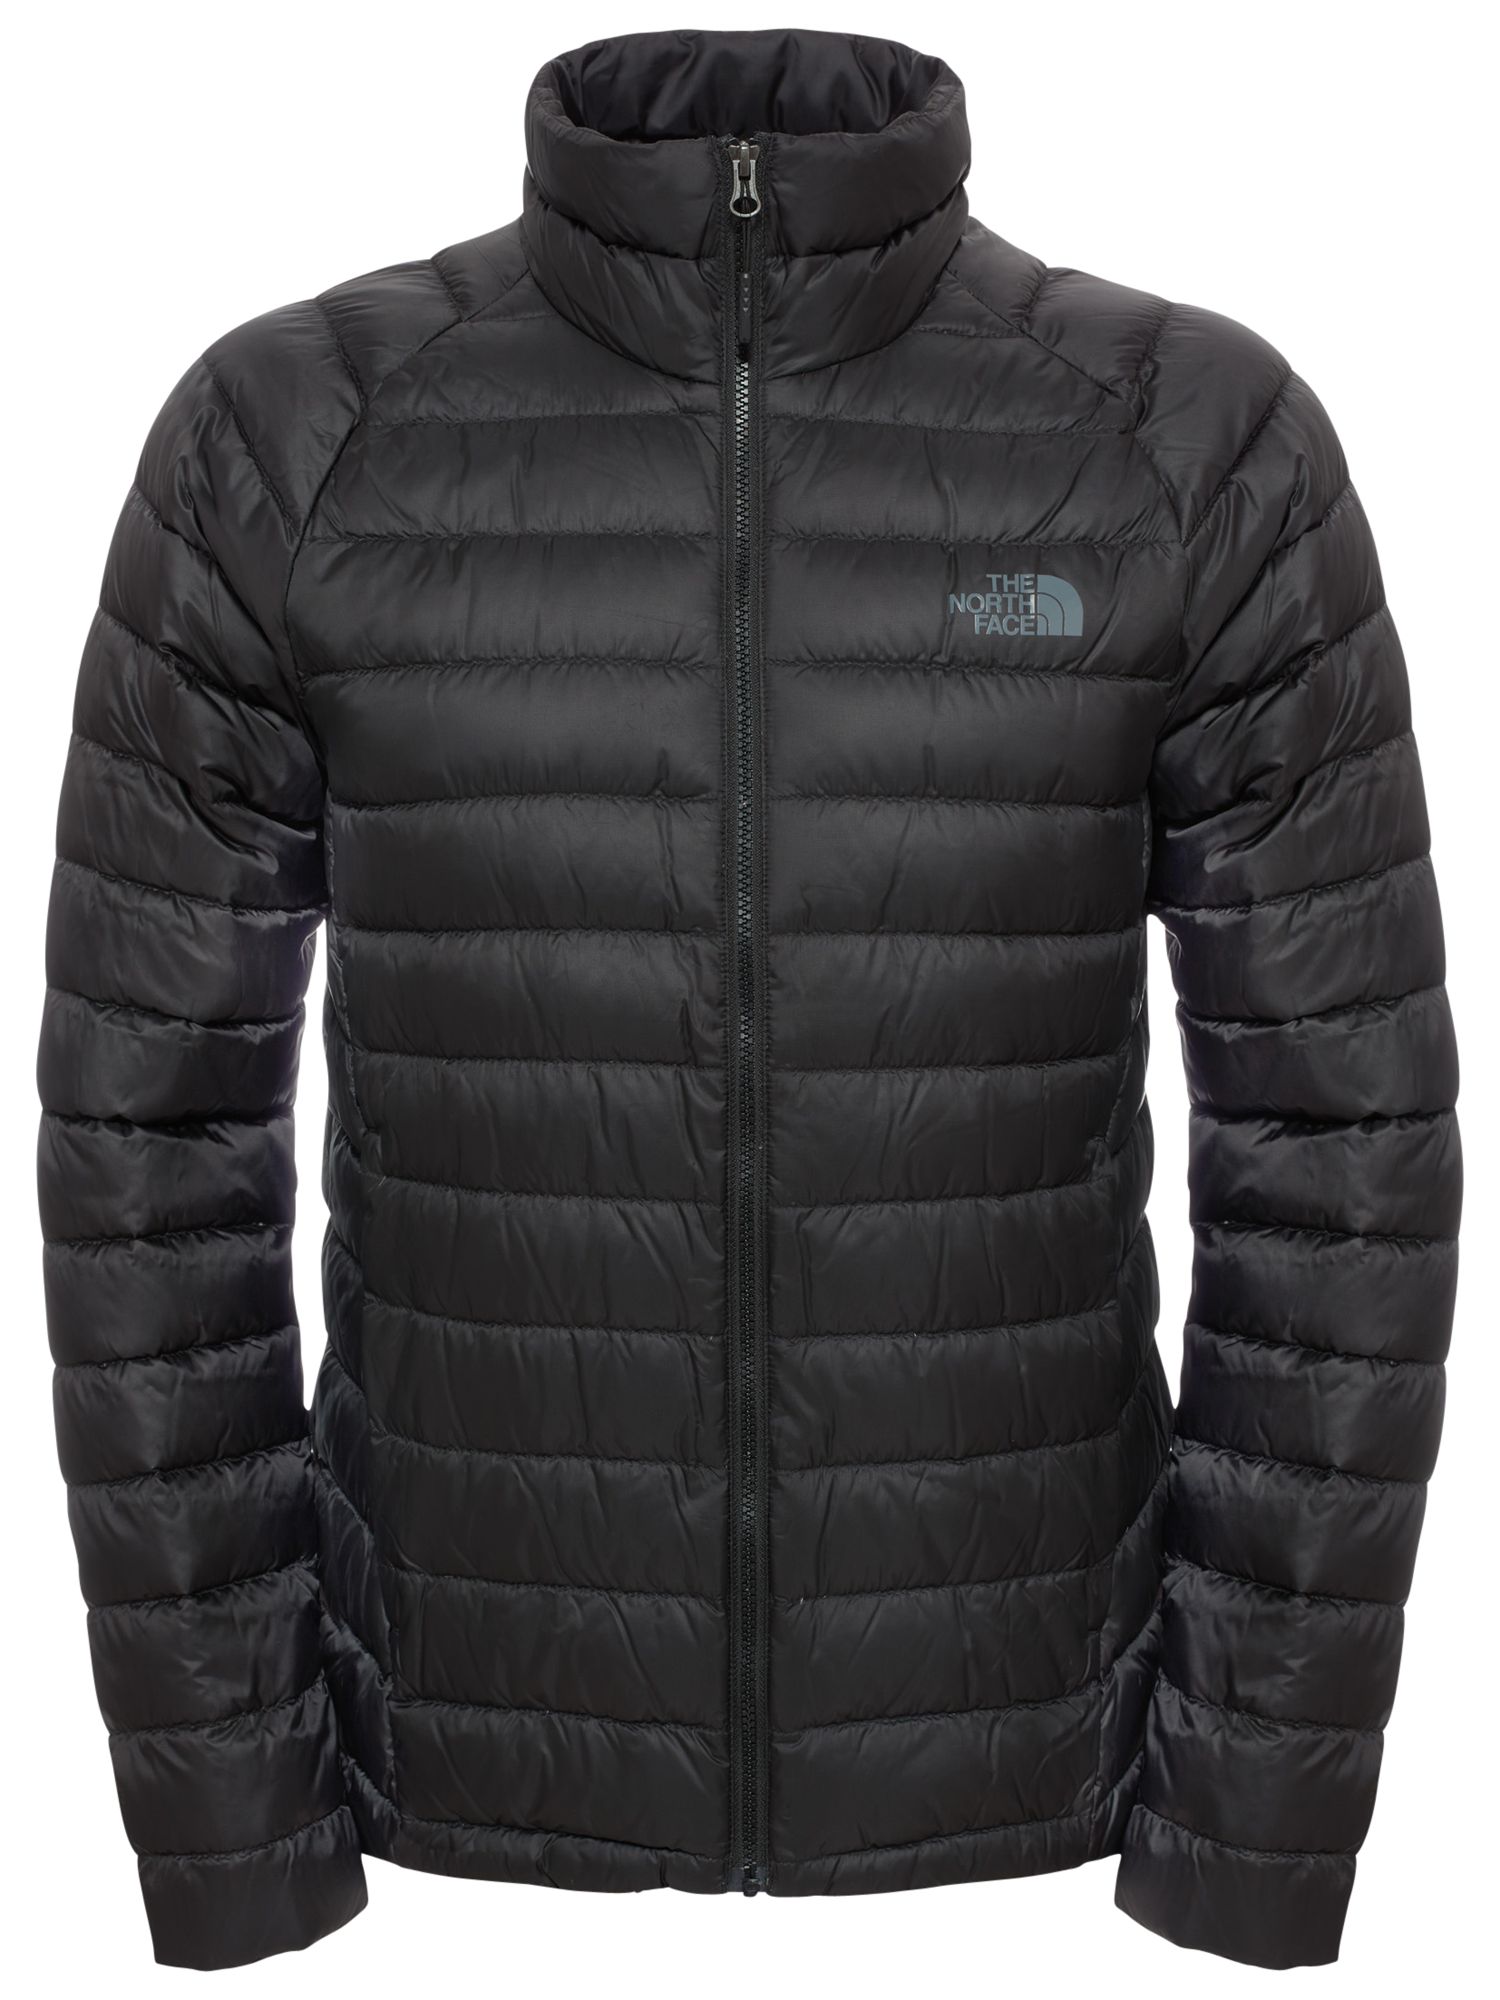 The North Face Men's Trevail Jacket, Black